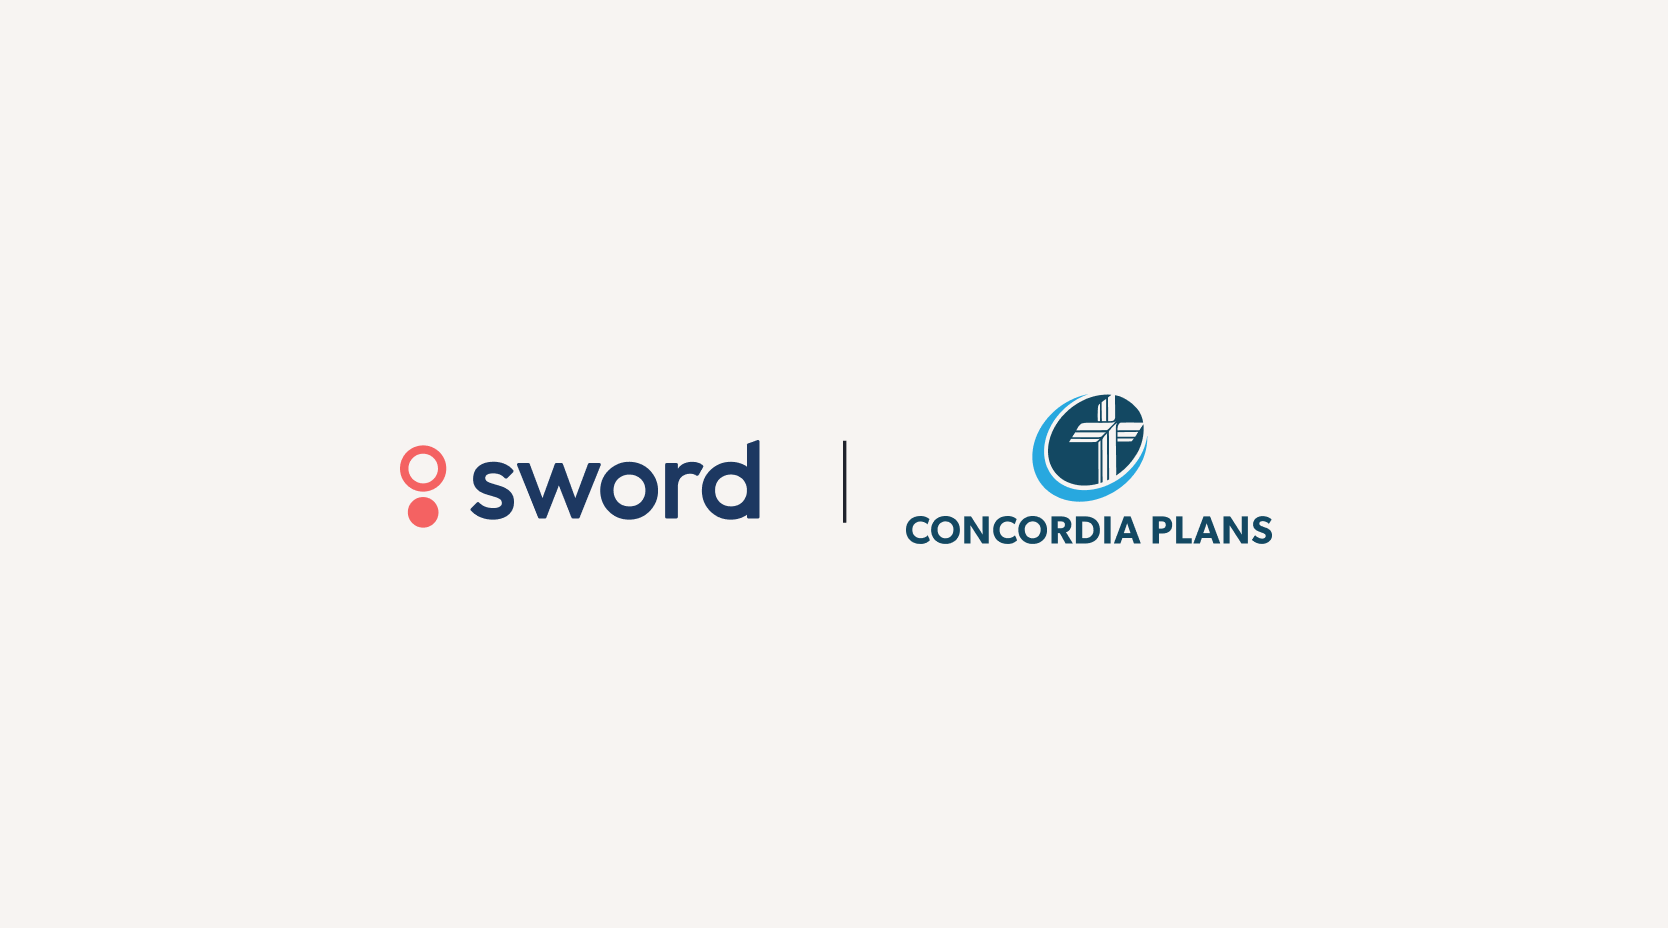 Concordia Plan Services offers Sword Health digital MSK care